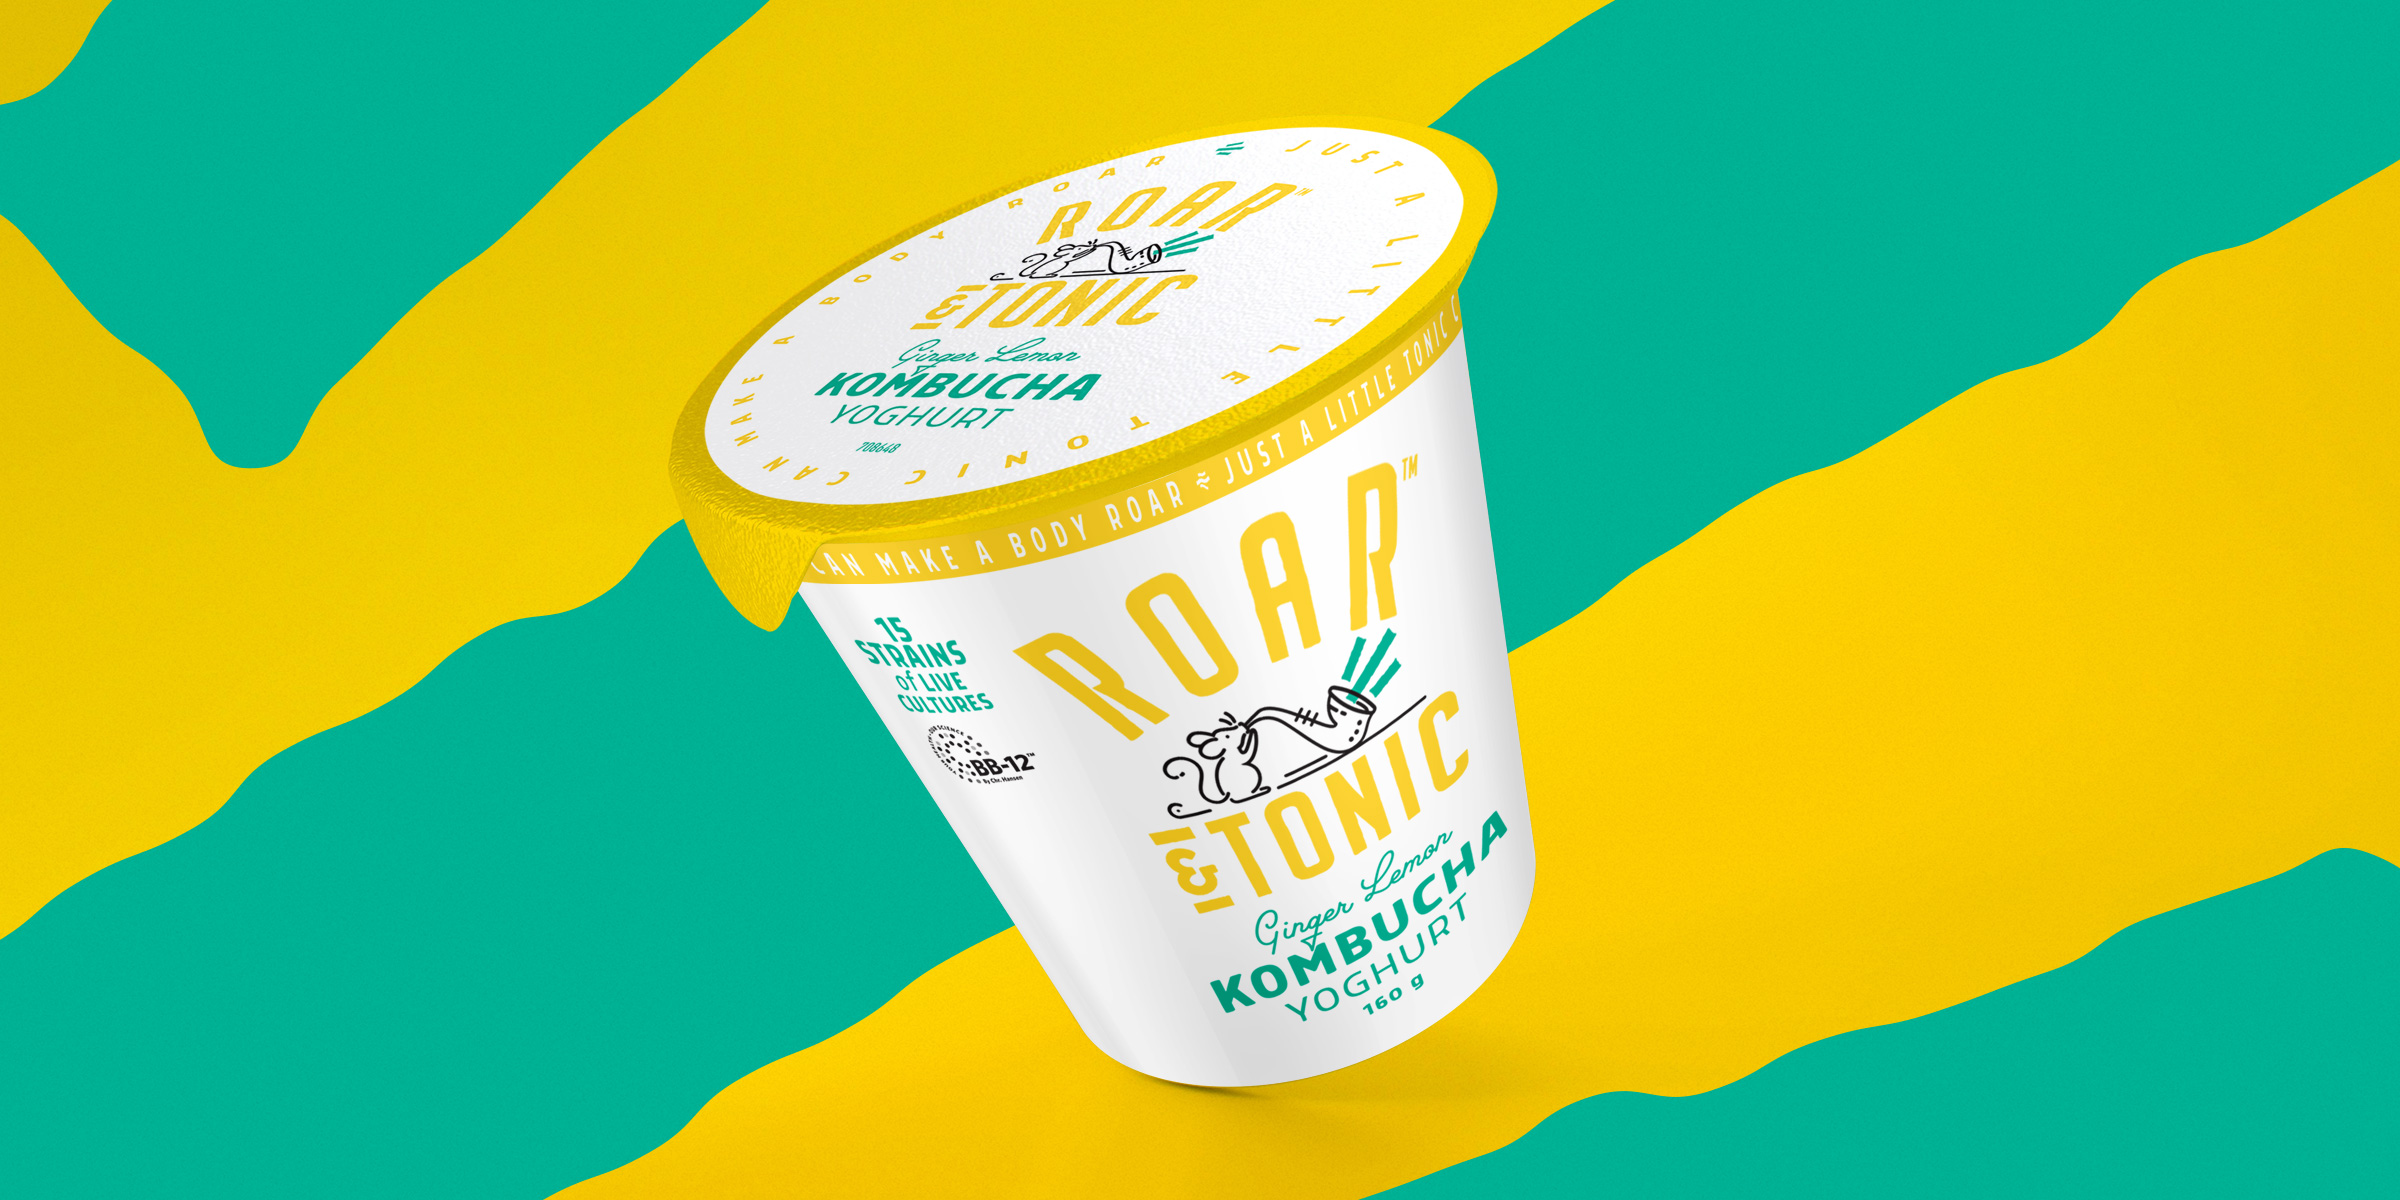 roar-and-tonic-branding-packaging-design-boxer-and-co-sydney-agency-yoghurt